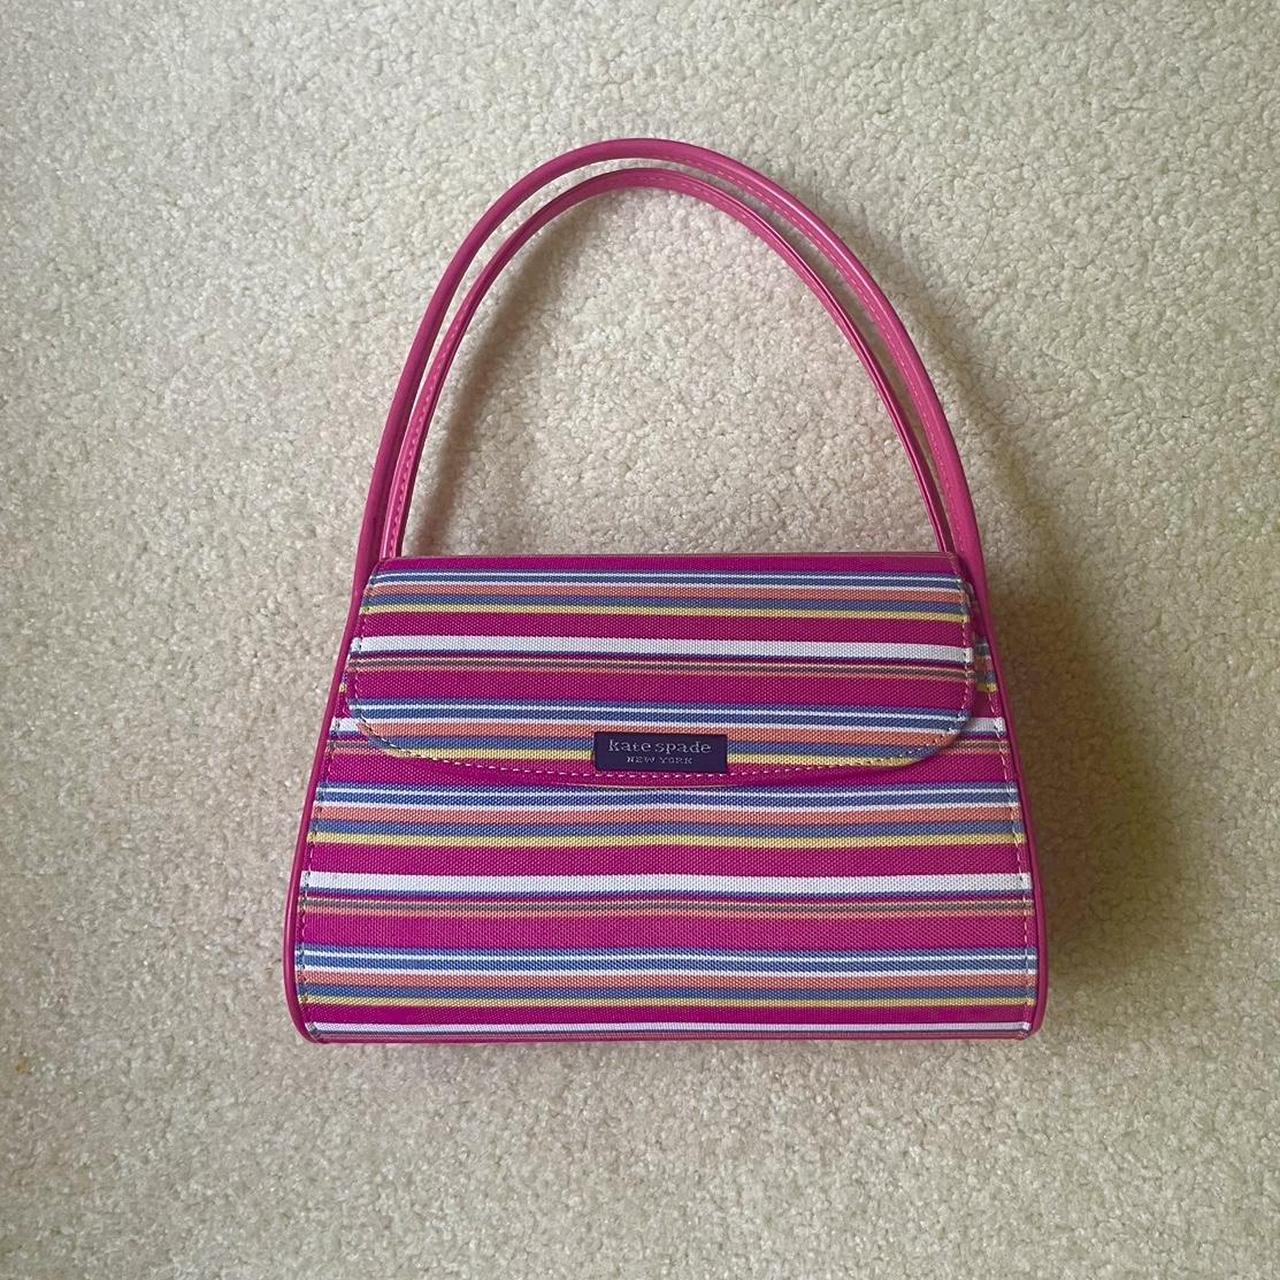 Vintage Kate Spade purse that has pink and white - Depop